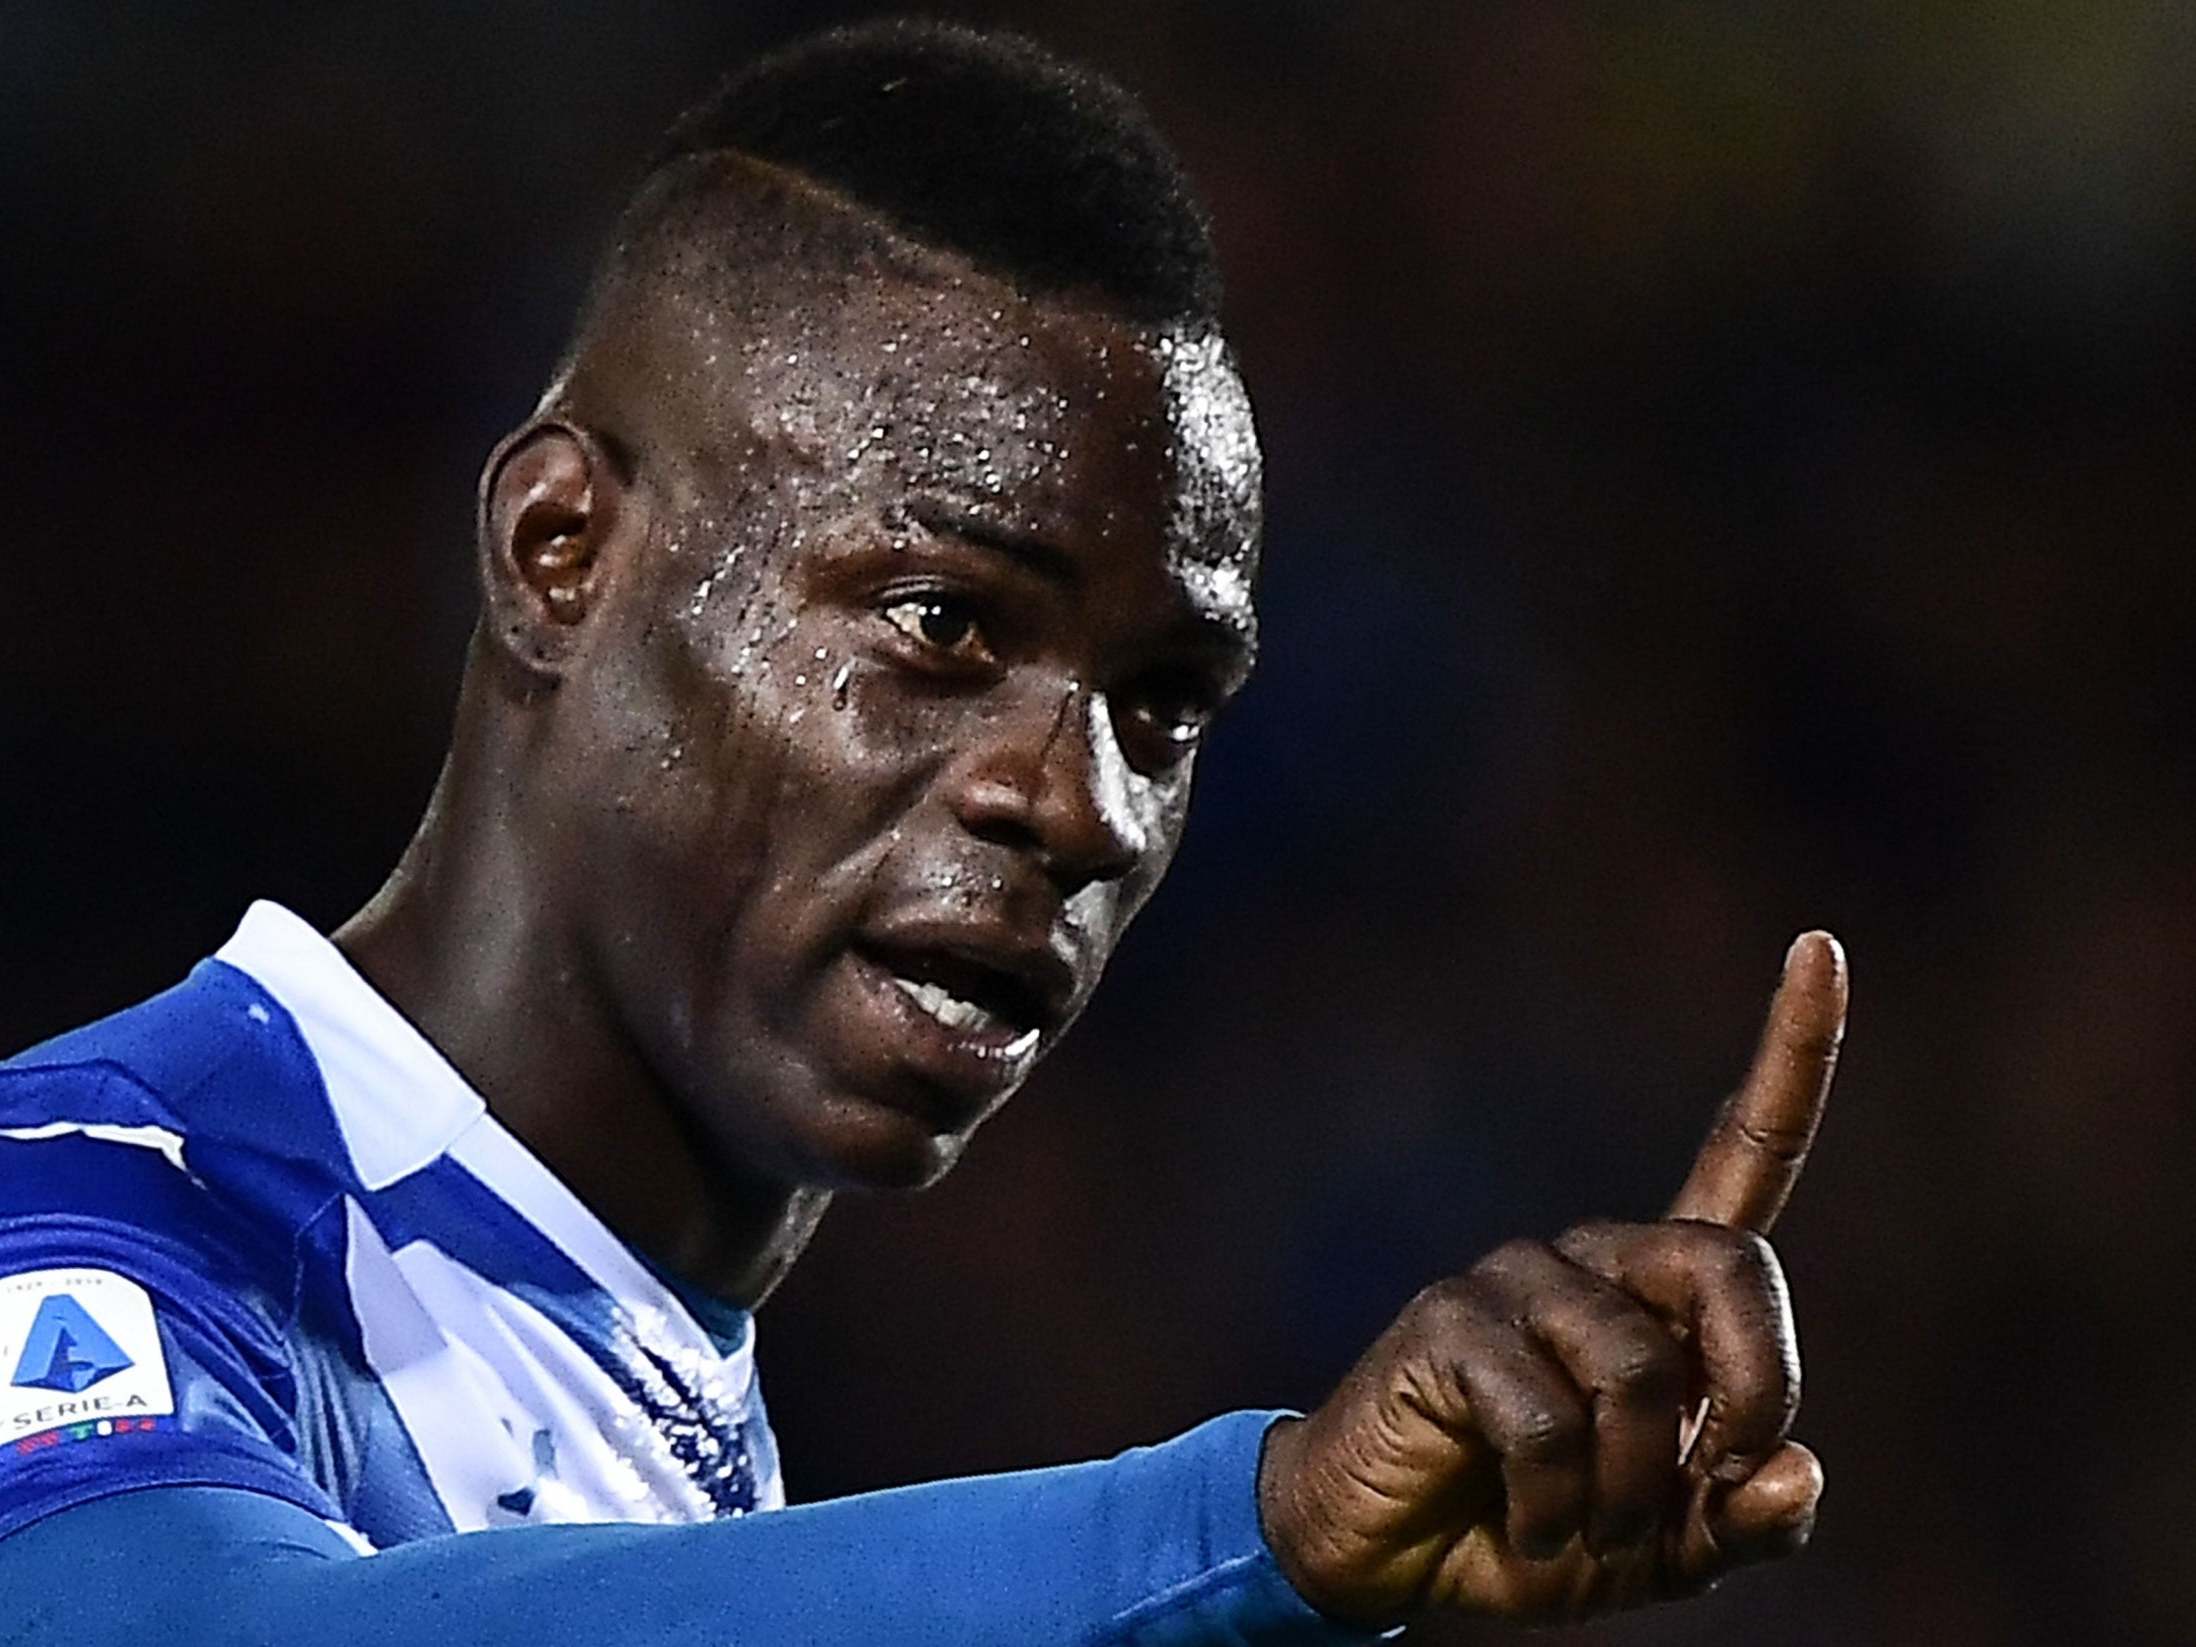 Brescia insist the comments made by Cellino on Balotelli were a joke